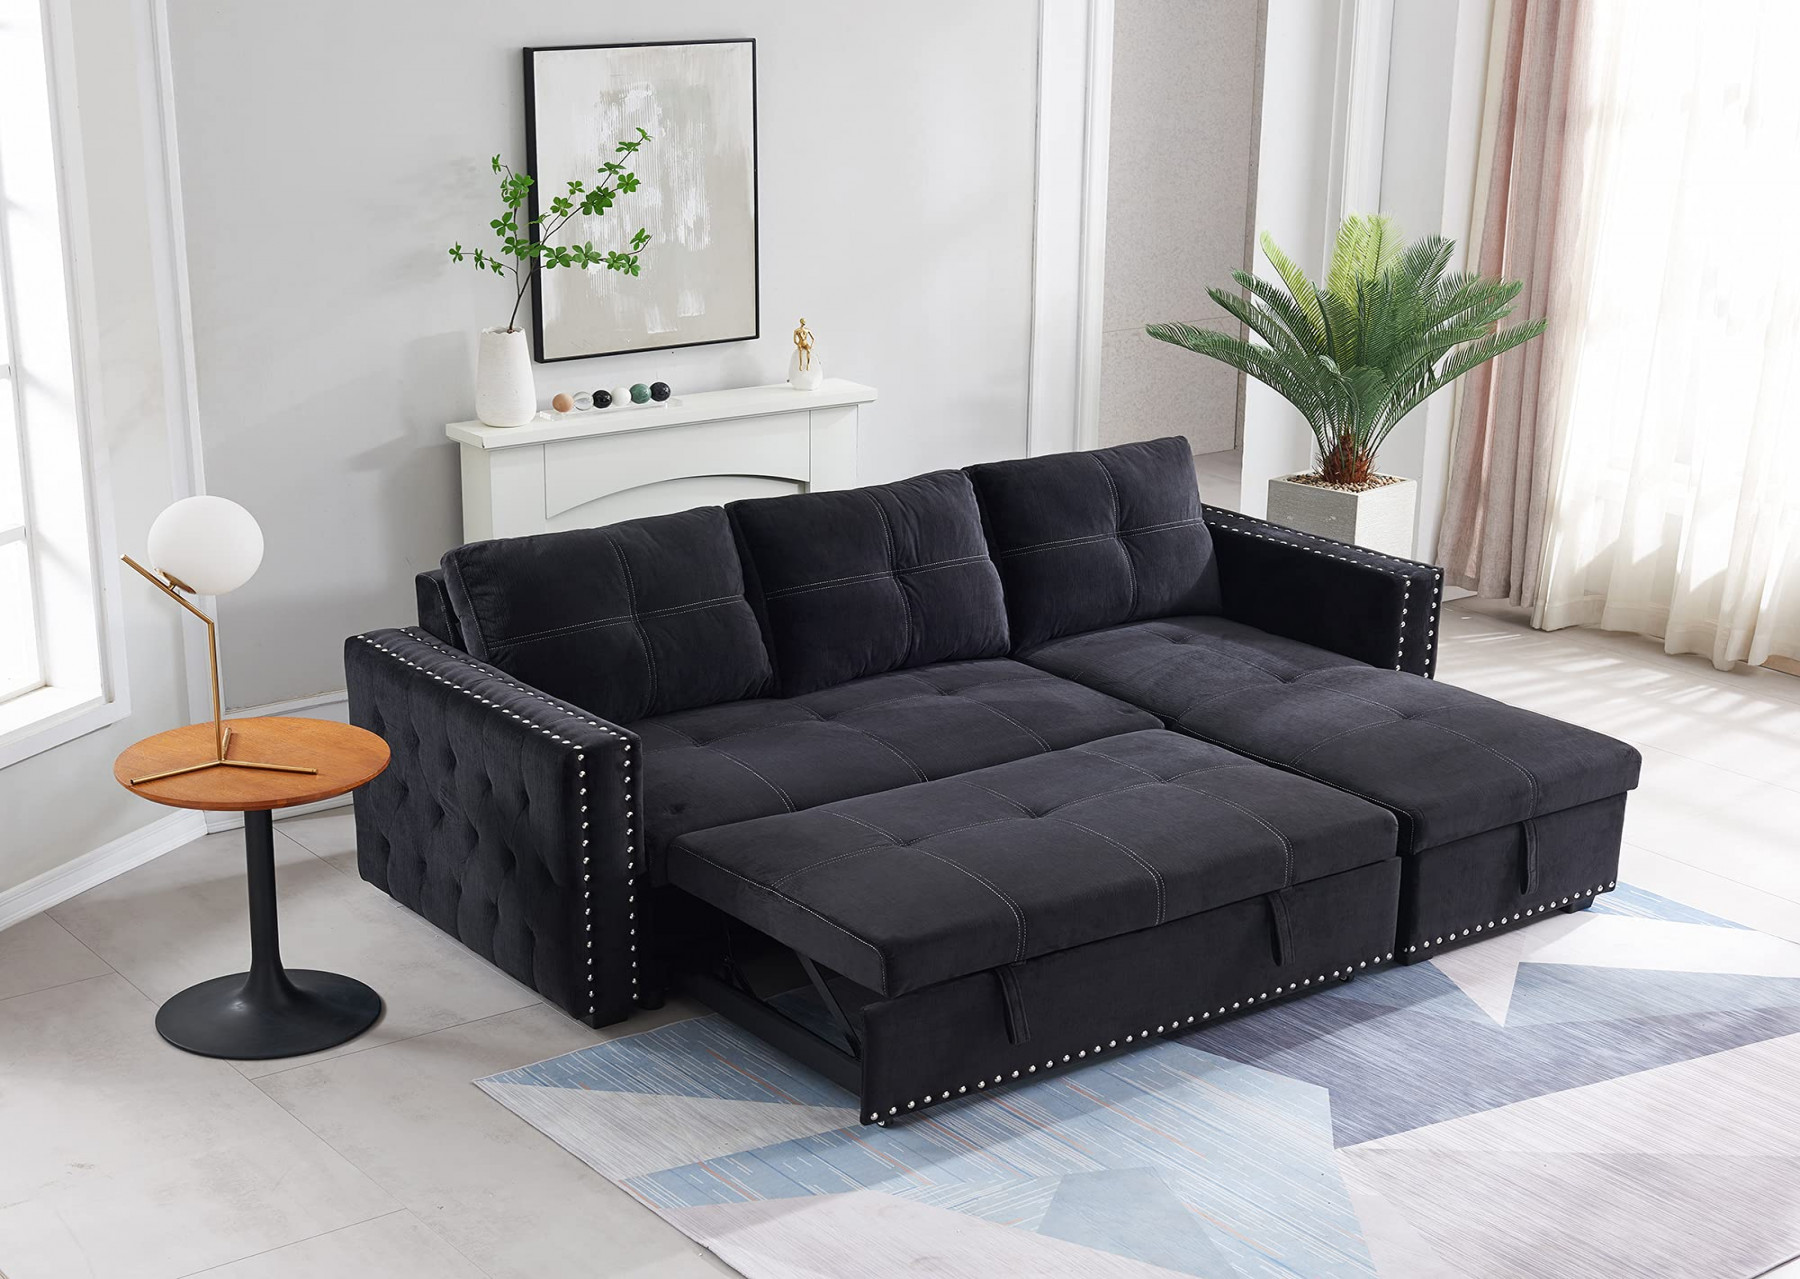 Sectional Sofa With Pullout Bed